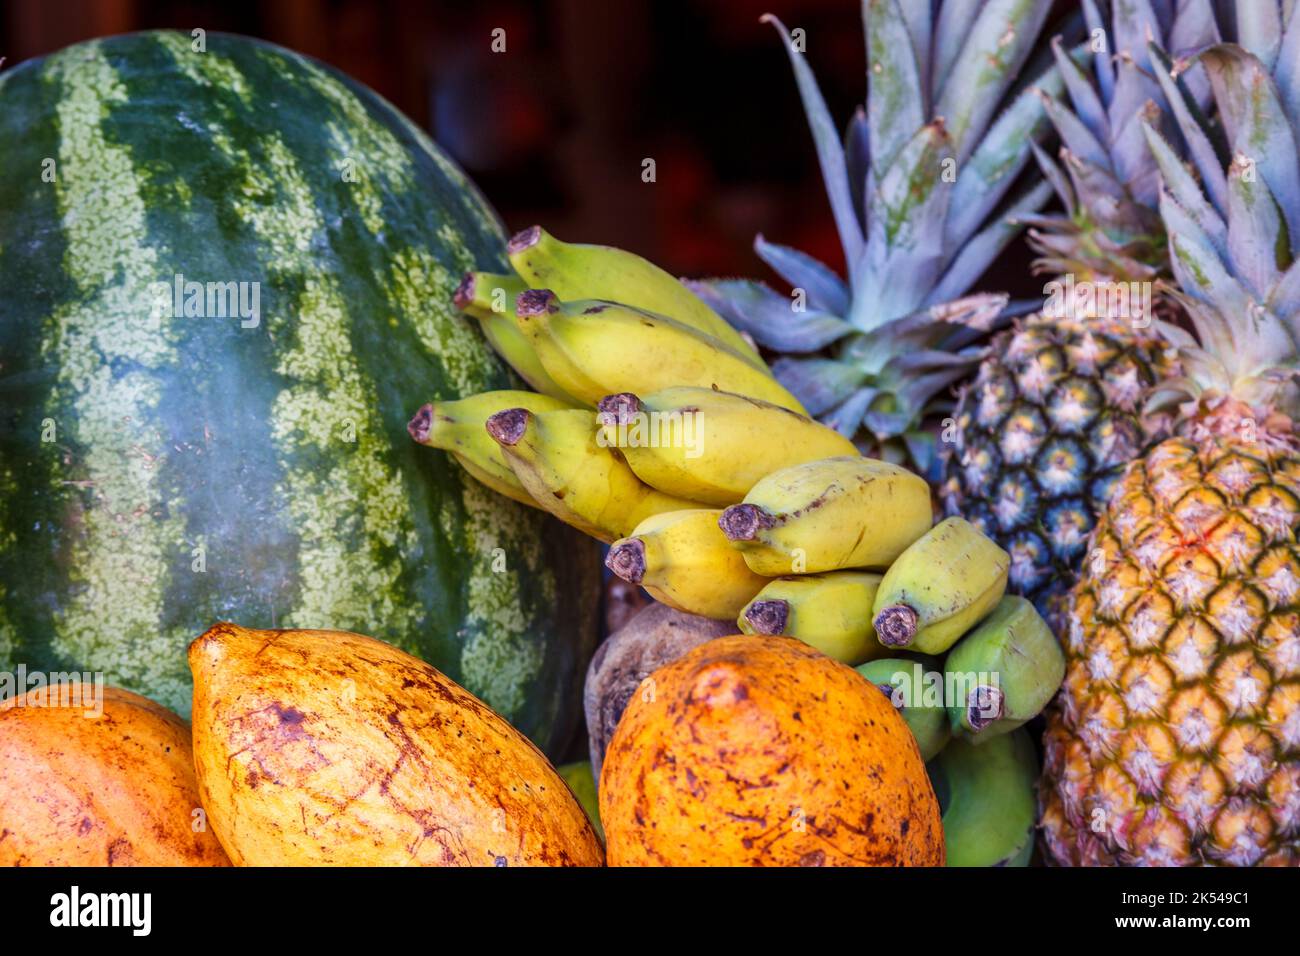 Assortment of colorful tropical fruits in Salvador, Bahia, Northeastern Brazil Stock Photo